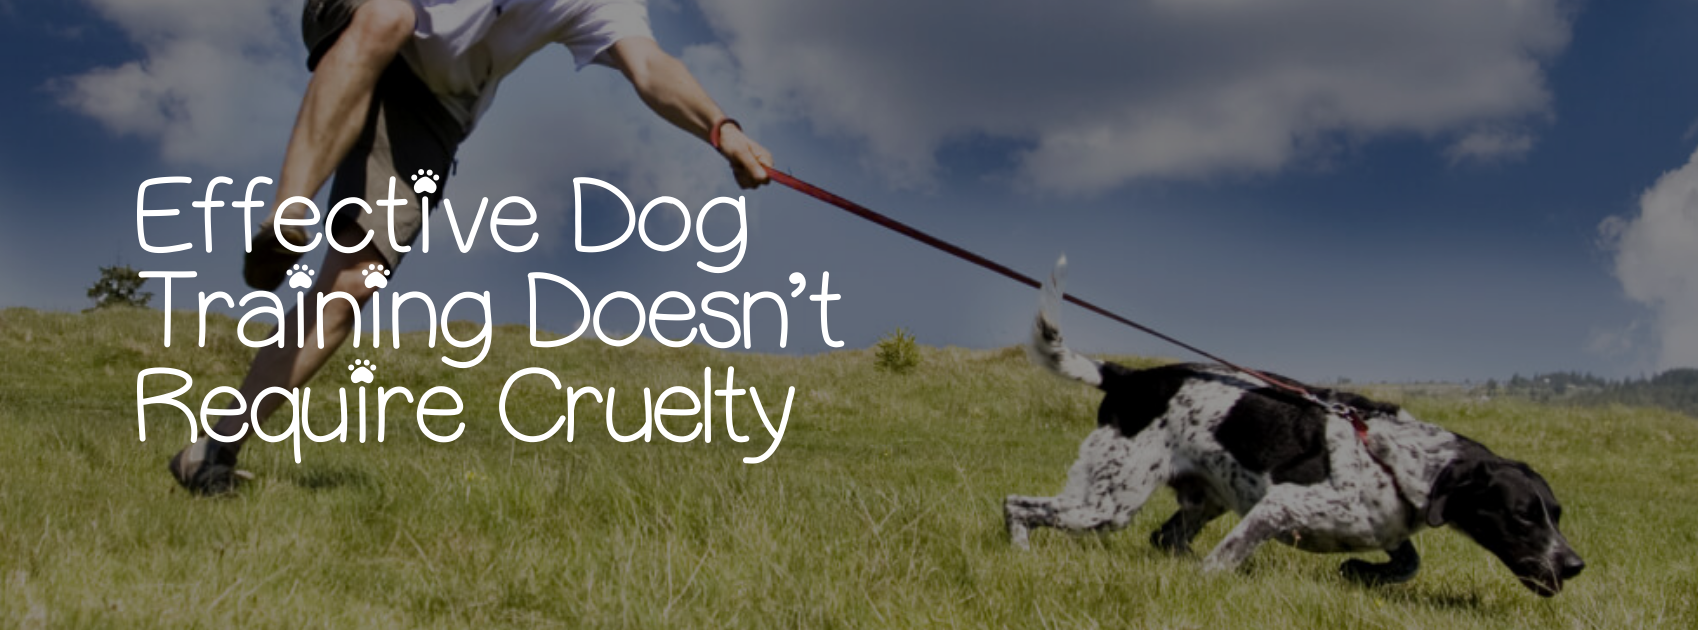 EFFECTIVE DOG TRAINING DOESN’T REQUIRE CRUELTY